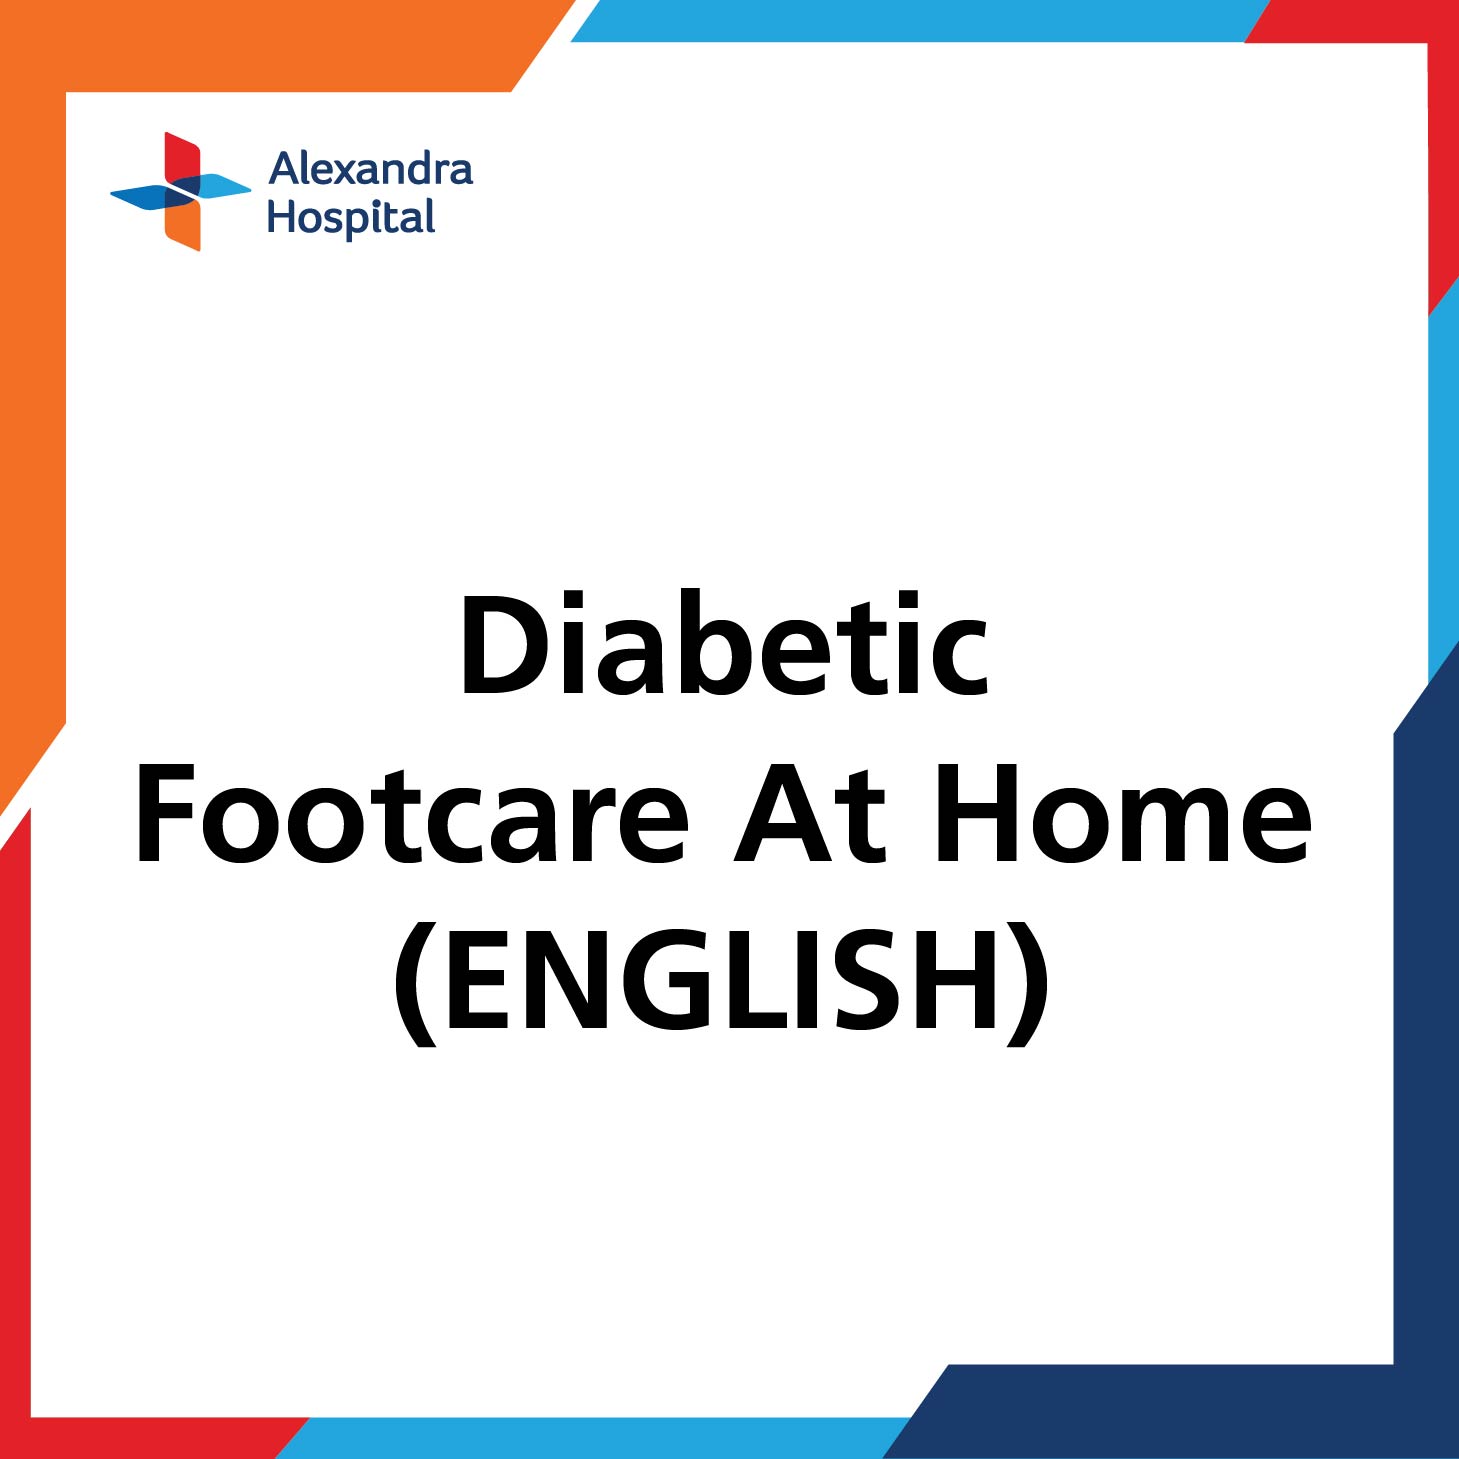 POD - Diabetic Footcare at Home (English)